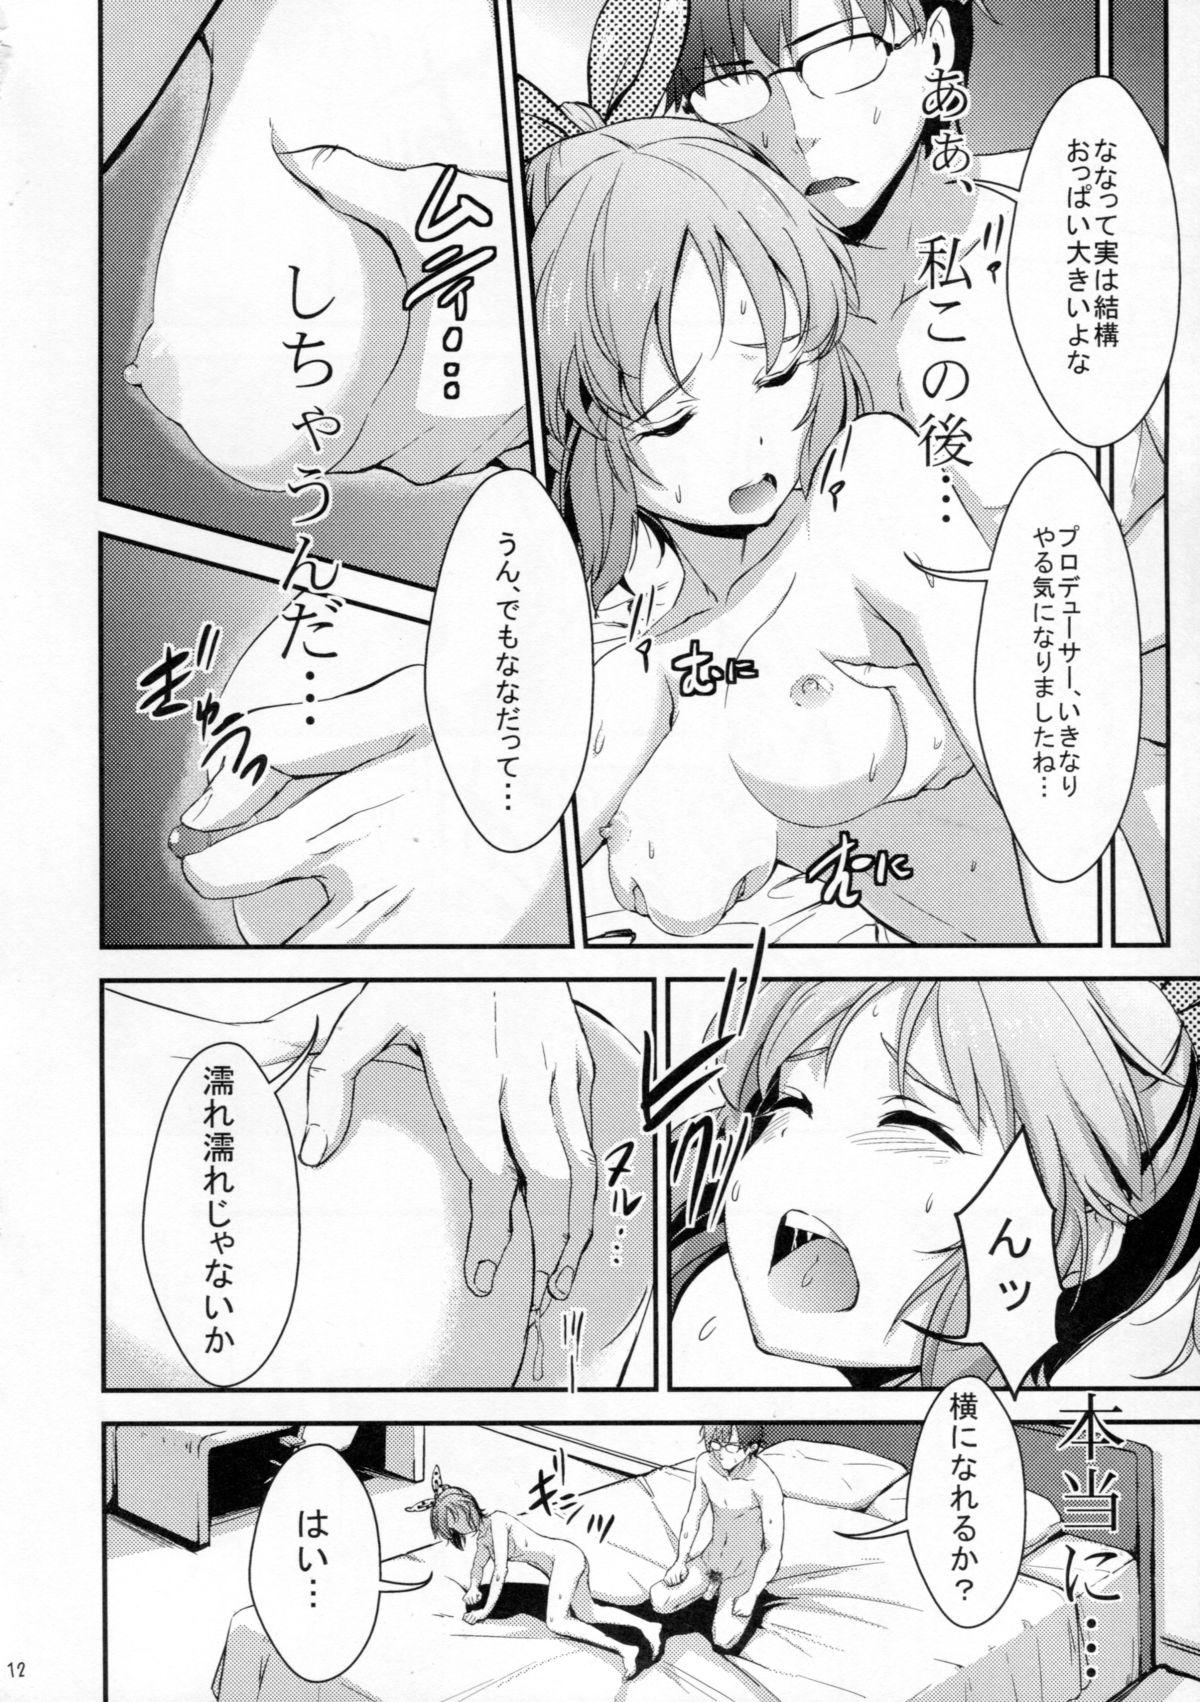 Maid Siccative 86 - The idolmaster Ikillitts - Page 10